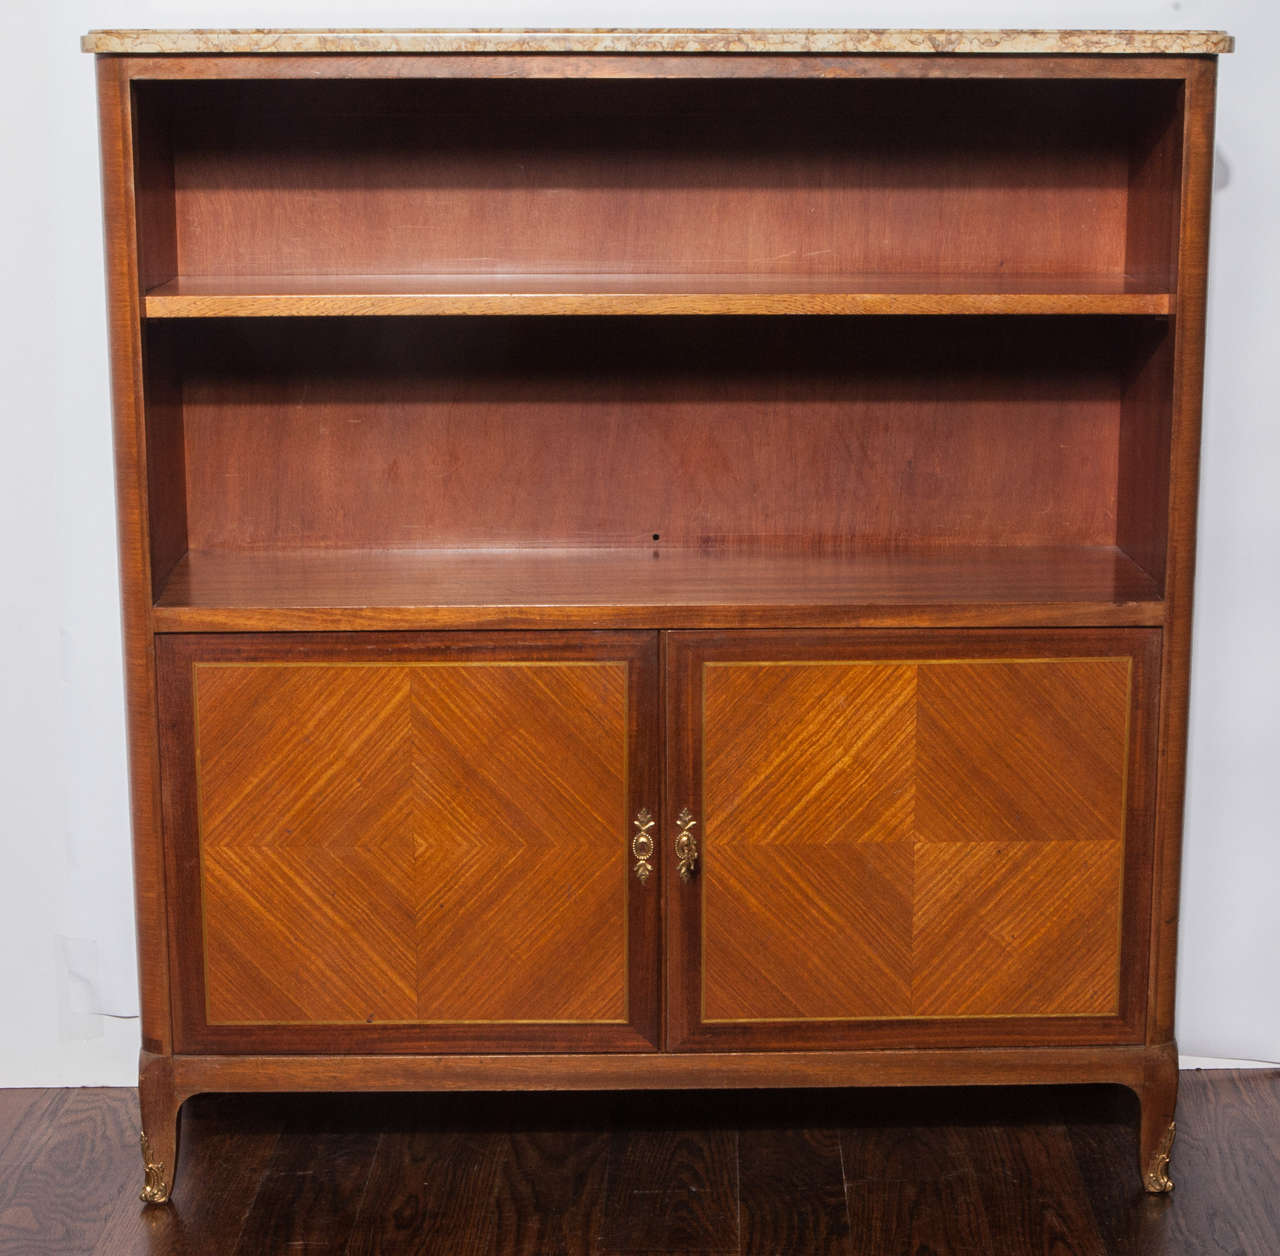 Bookshelf is mahogany with inlaid doors and side panels.  Two open shelves.  Doors open to reveal one additional shelf.  Bronze hardware.